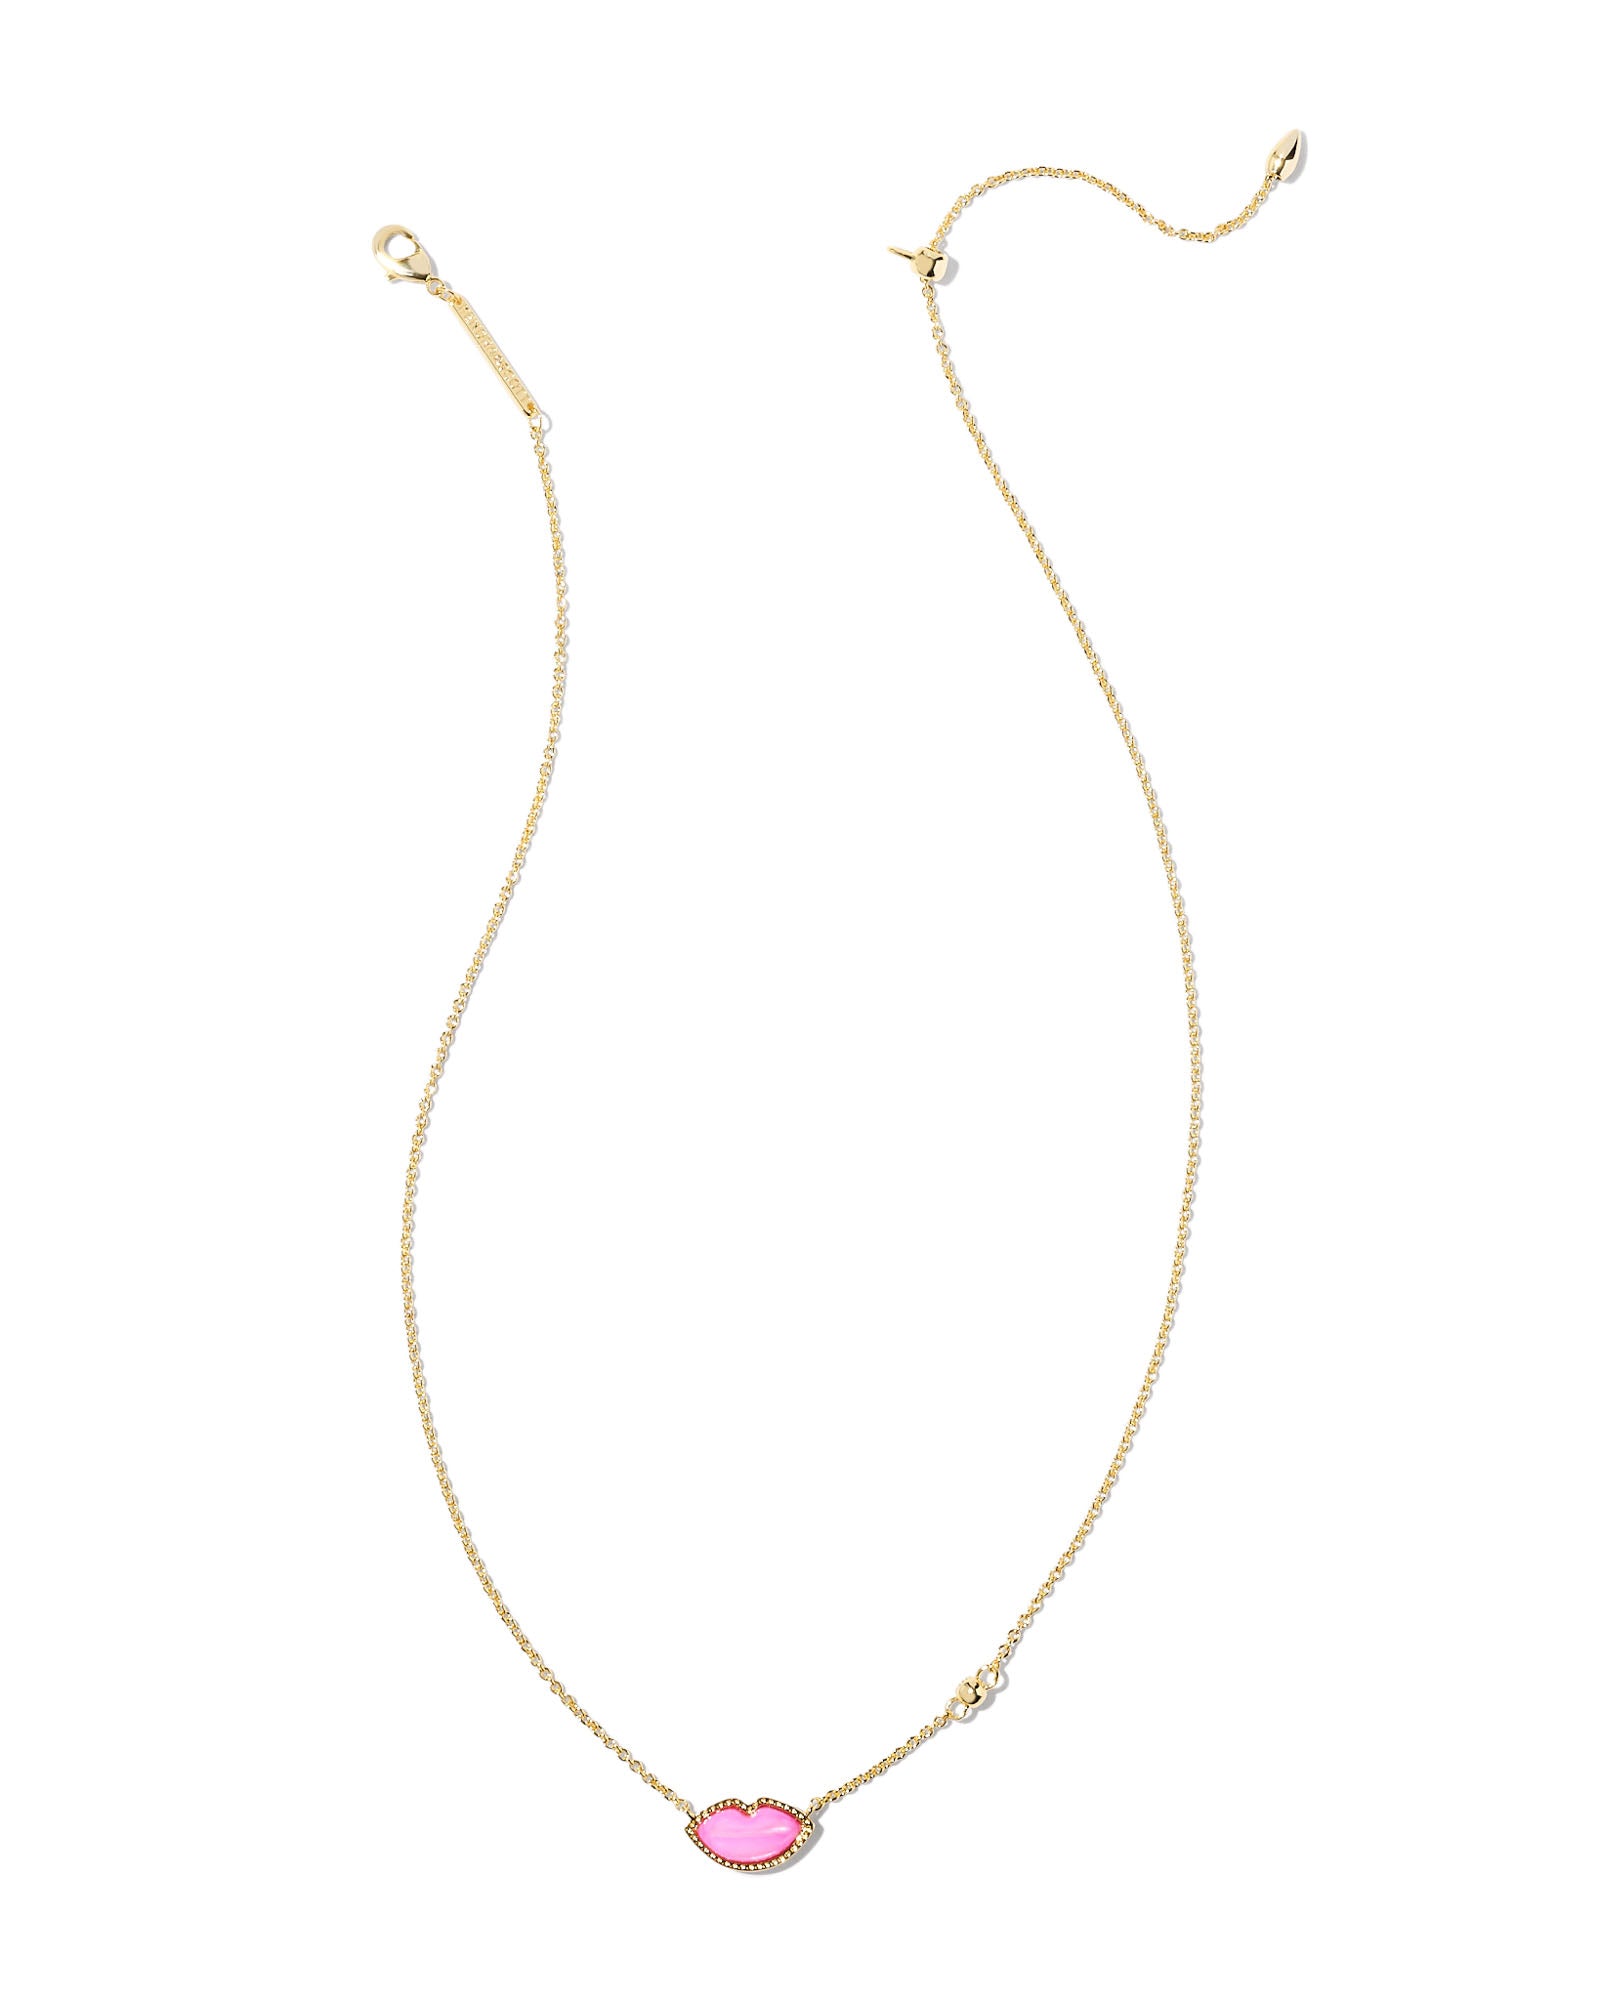 Kendra Scott Lips Pendant Necklace in Hot Pink Mother of Pearl and Gold Plated